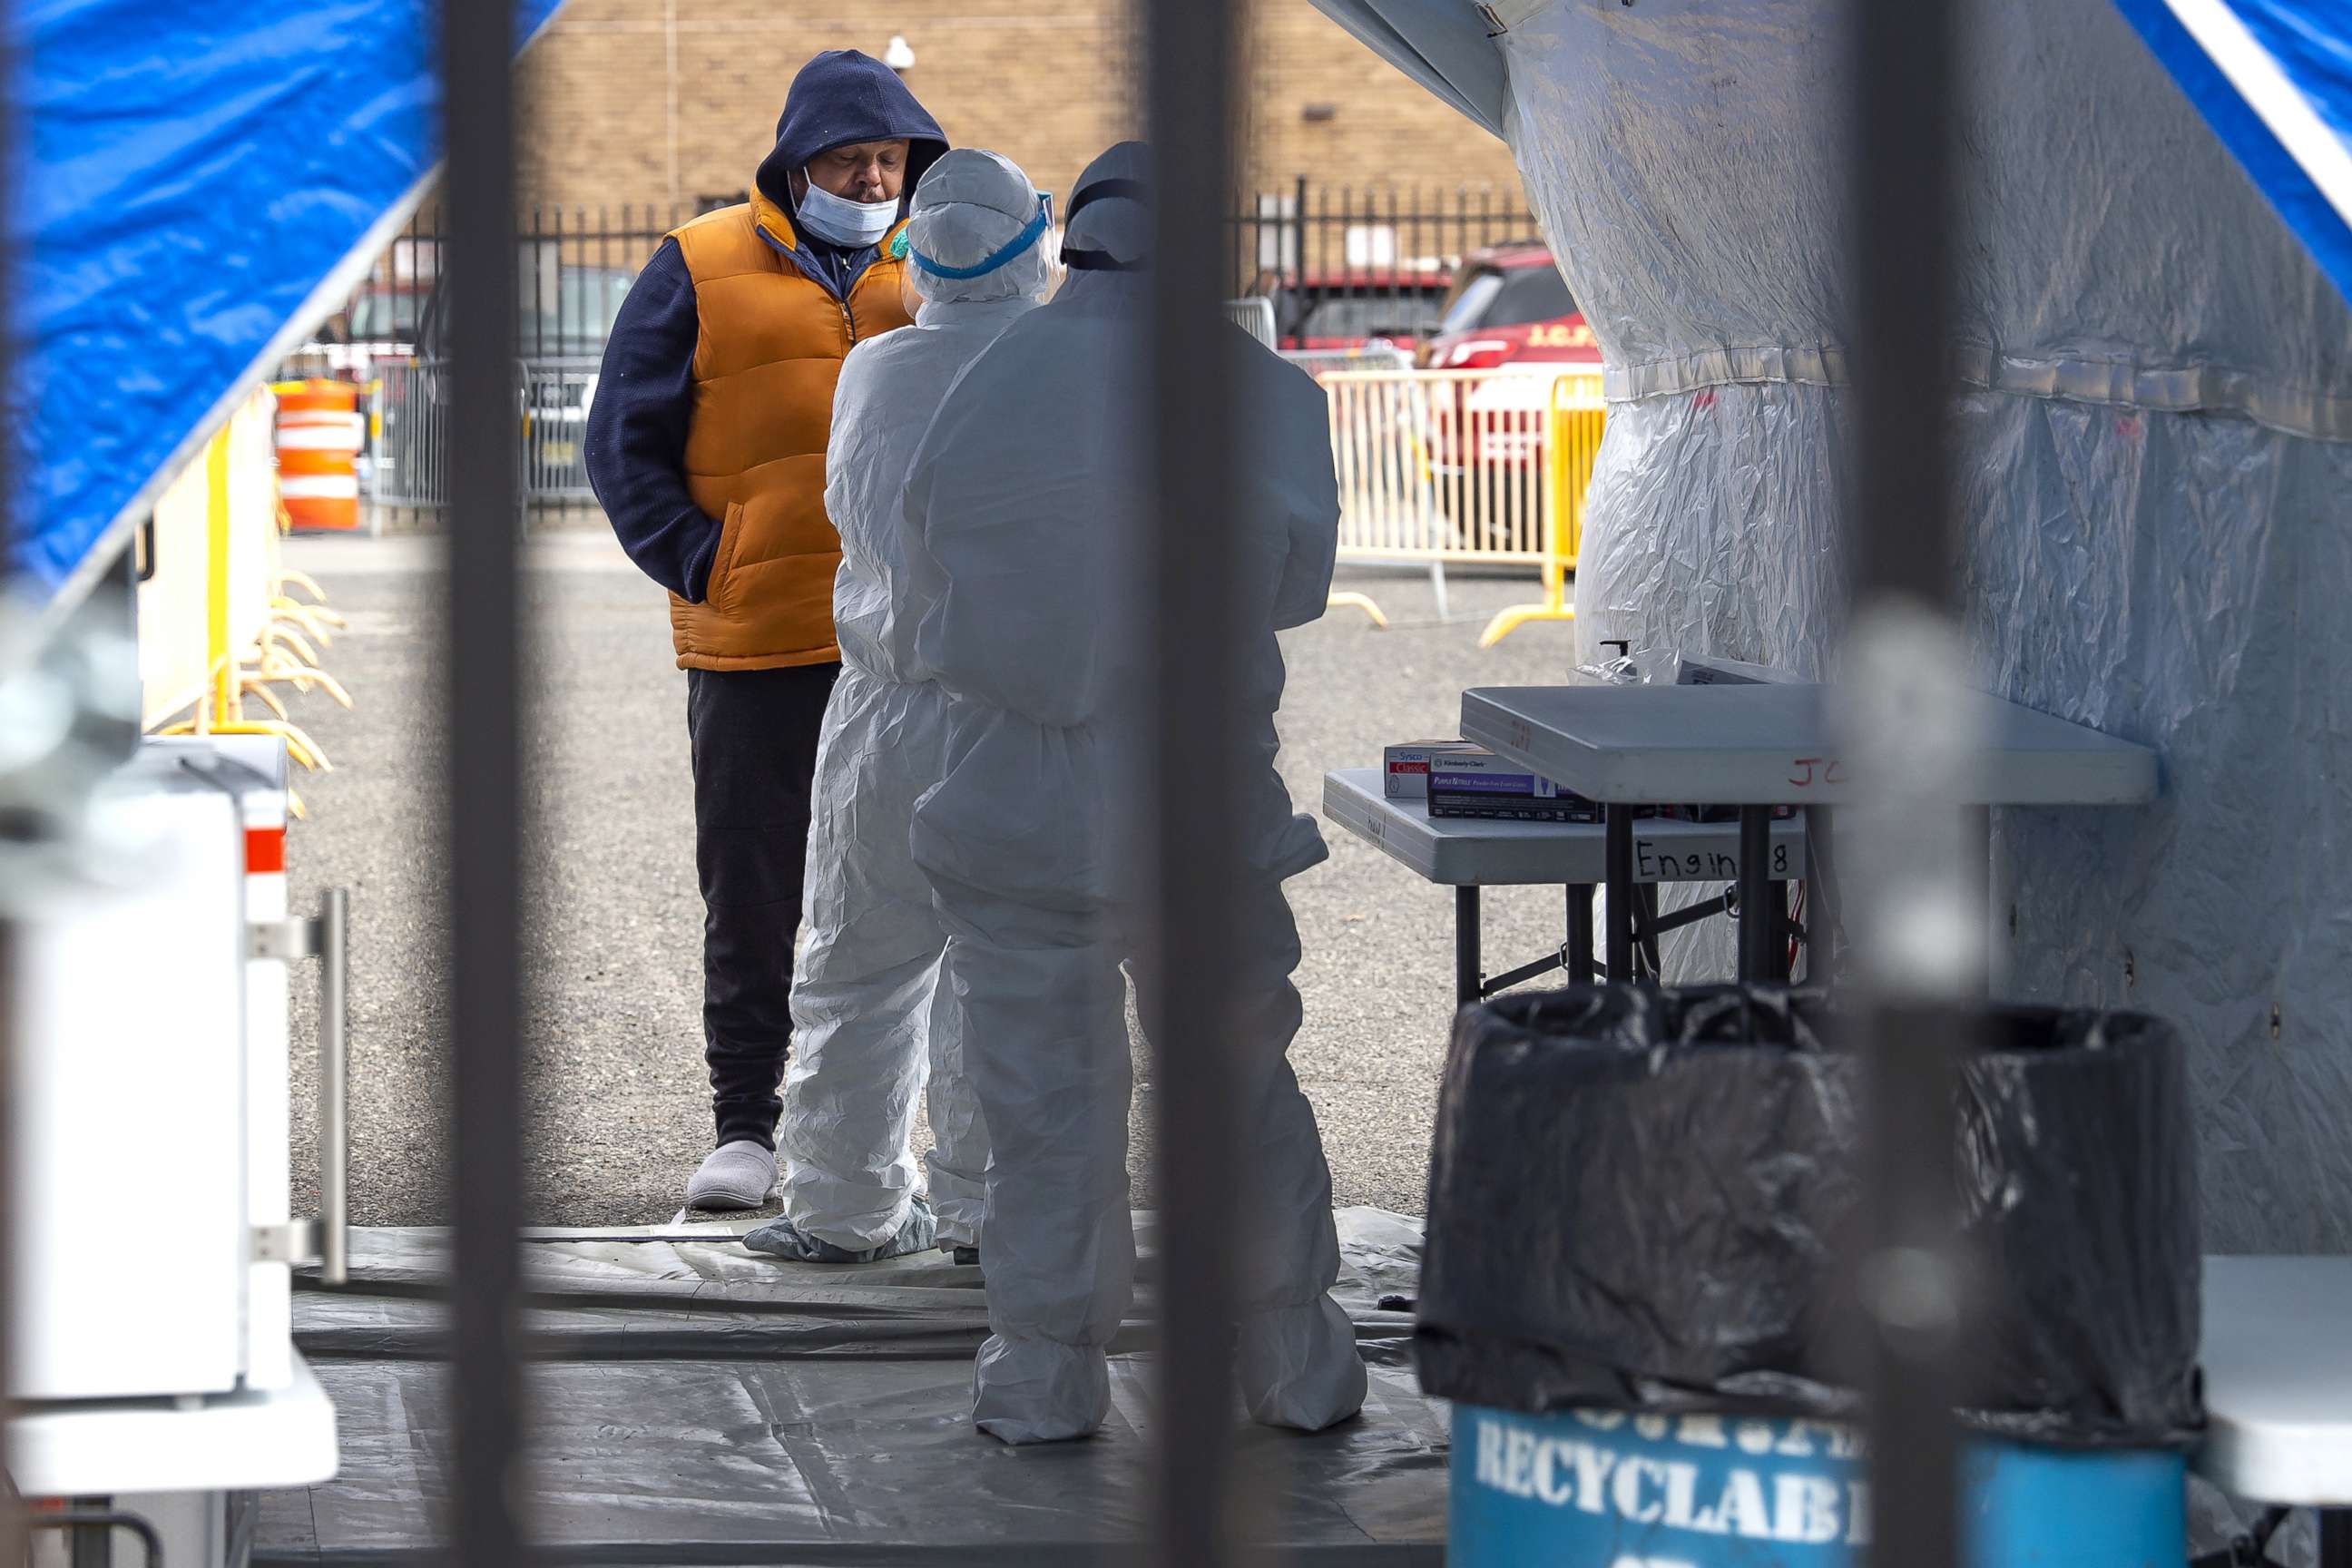 PHOTO: A man is tested by a doctor in protective gear at The Covid-19 testing site on Marin Boulevard in Jersey City, New Jersey, April 2, 2020.